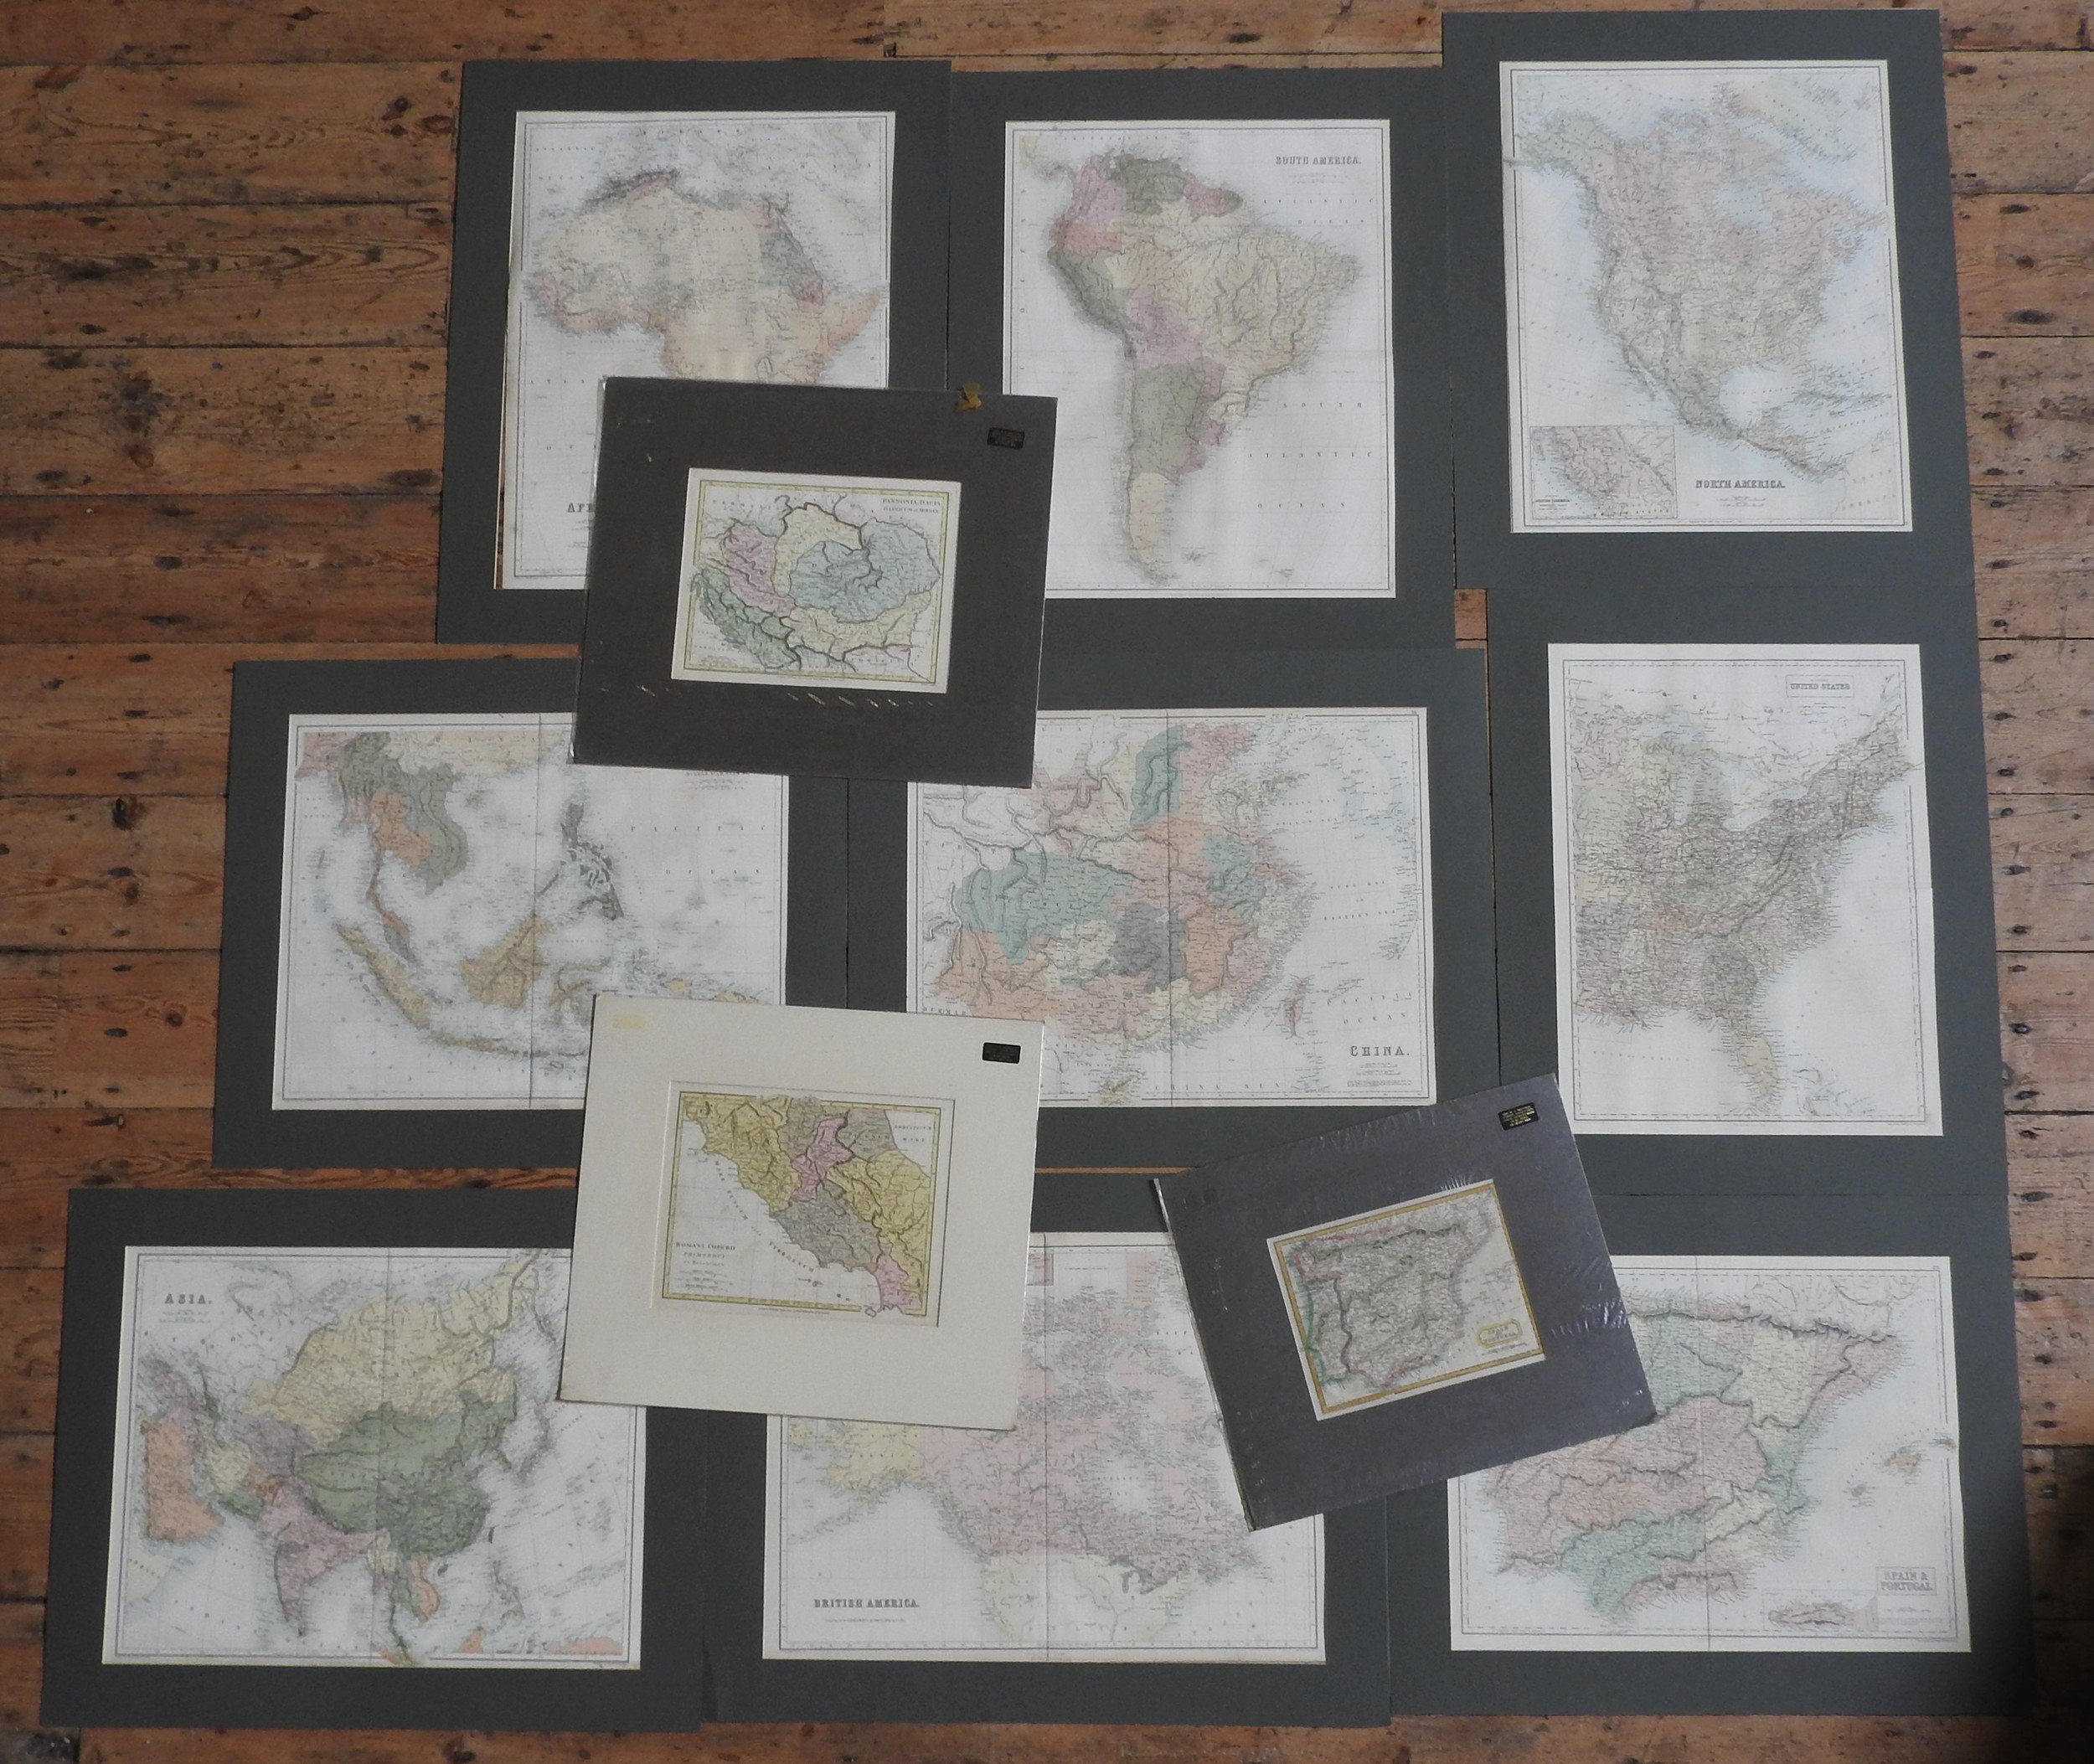 A FOLIO OF TWENTY FOUR ANTIQUE MAPS, hand coloured, various locations, countries and sizes